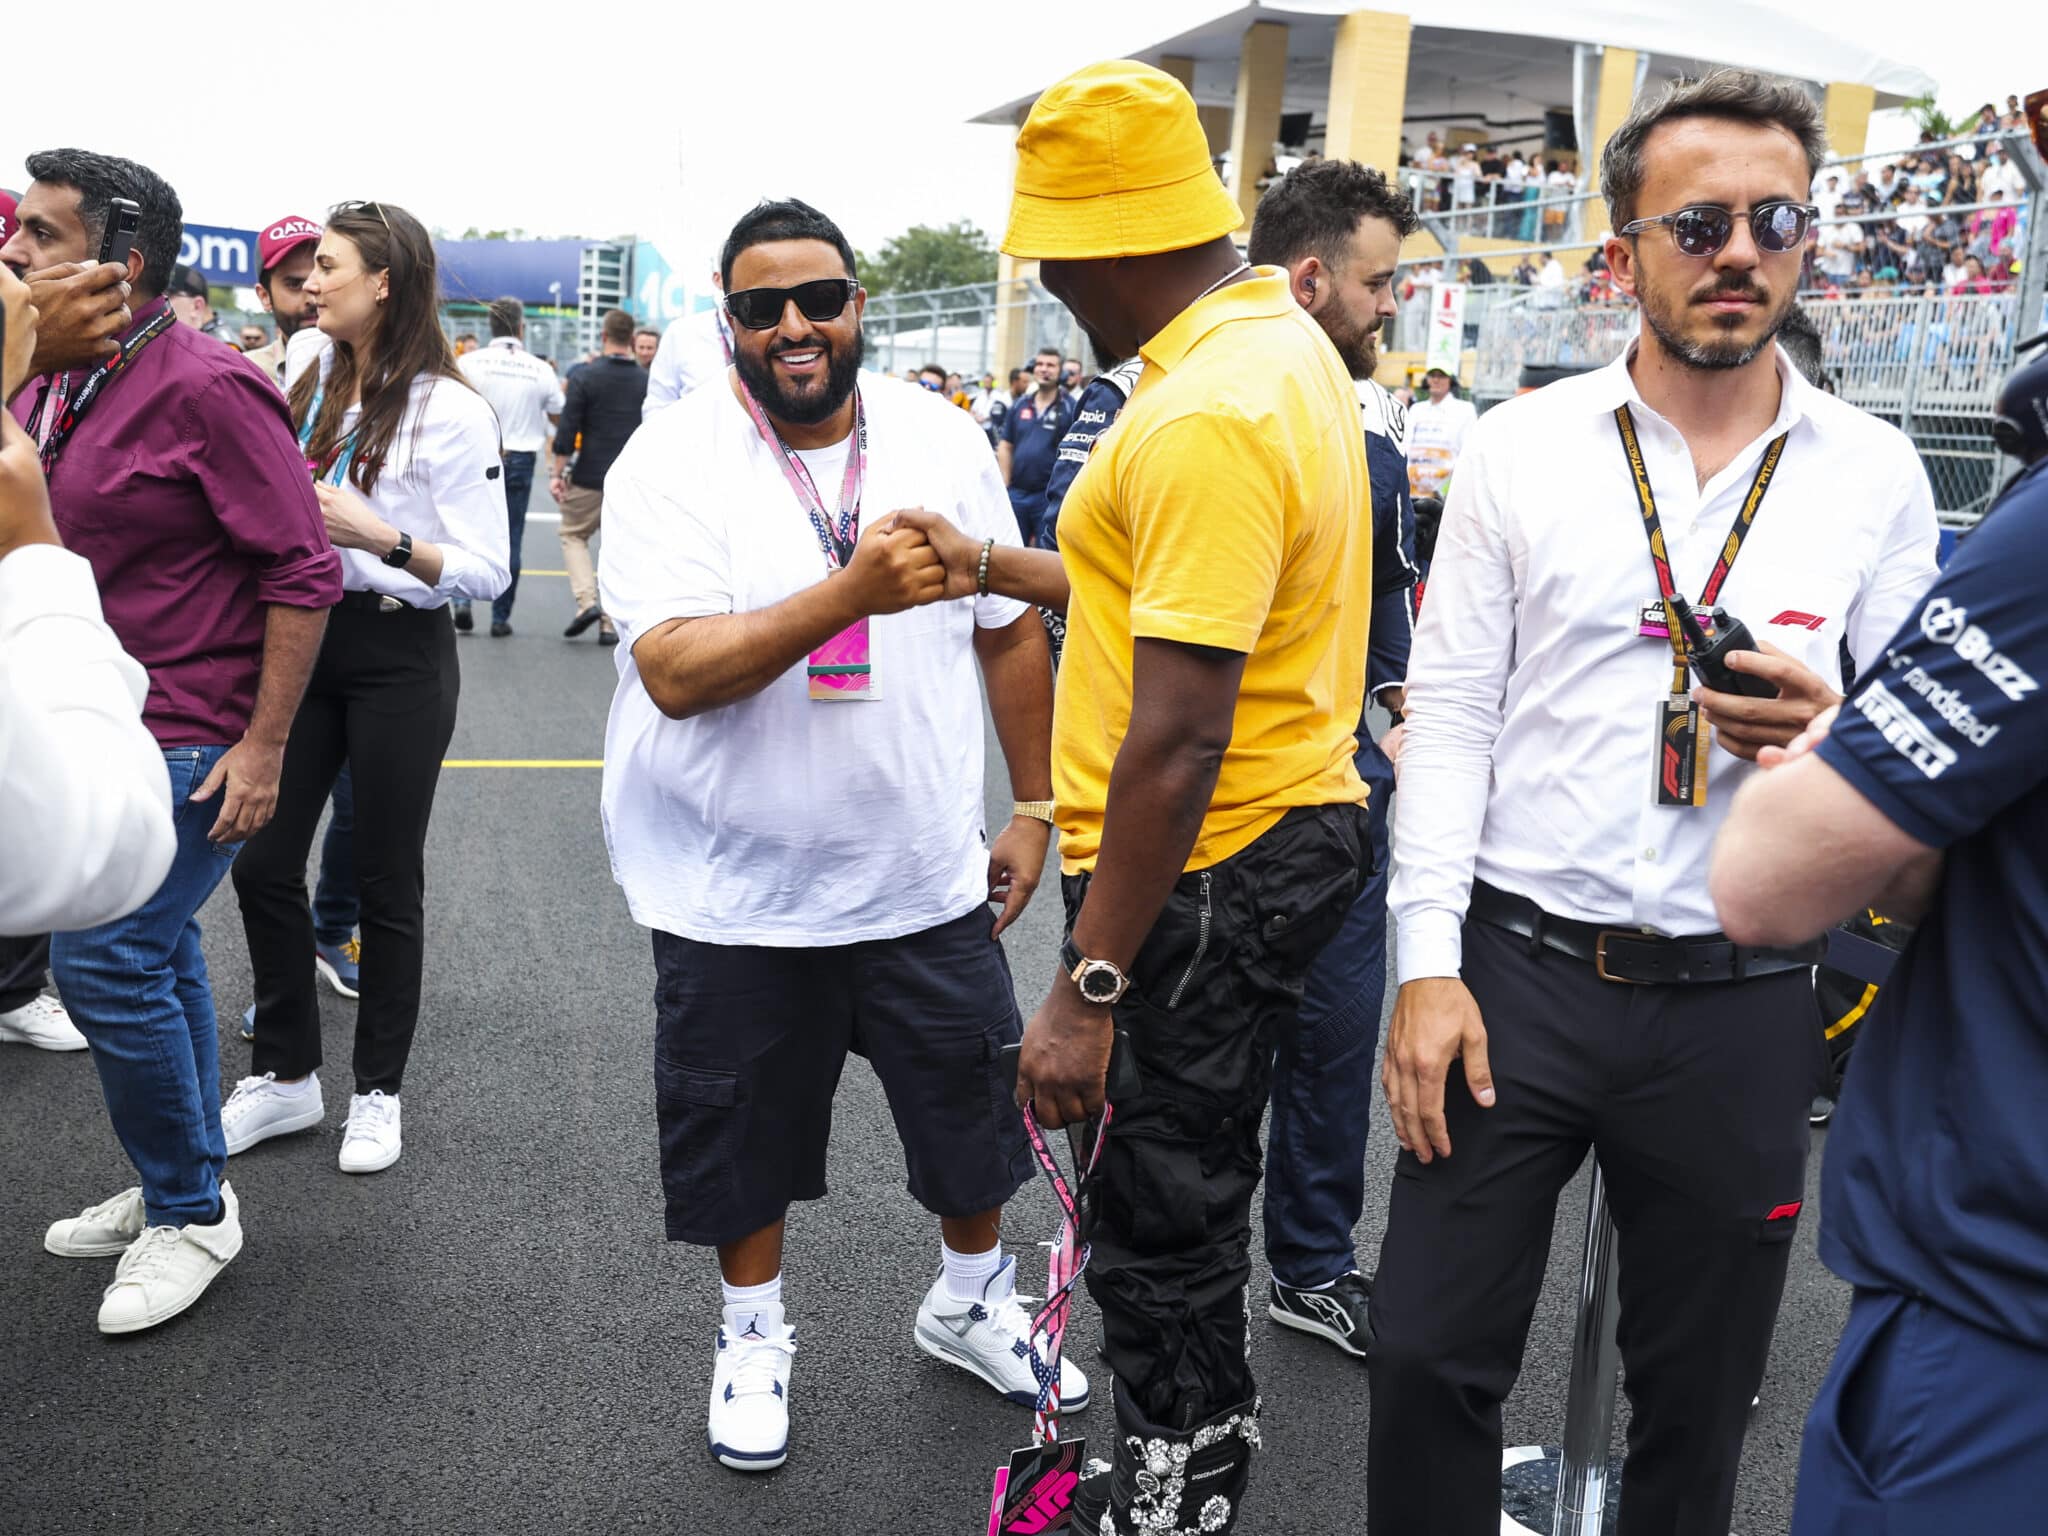 DJ Khaled was also on the F1 list in Miami.